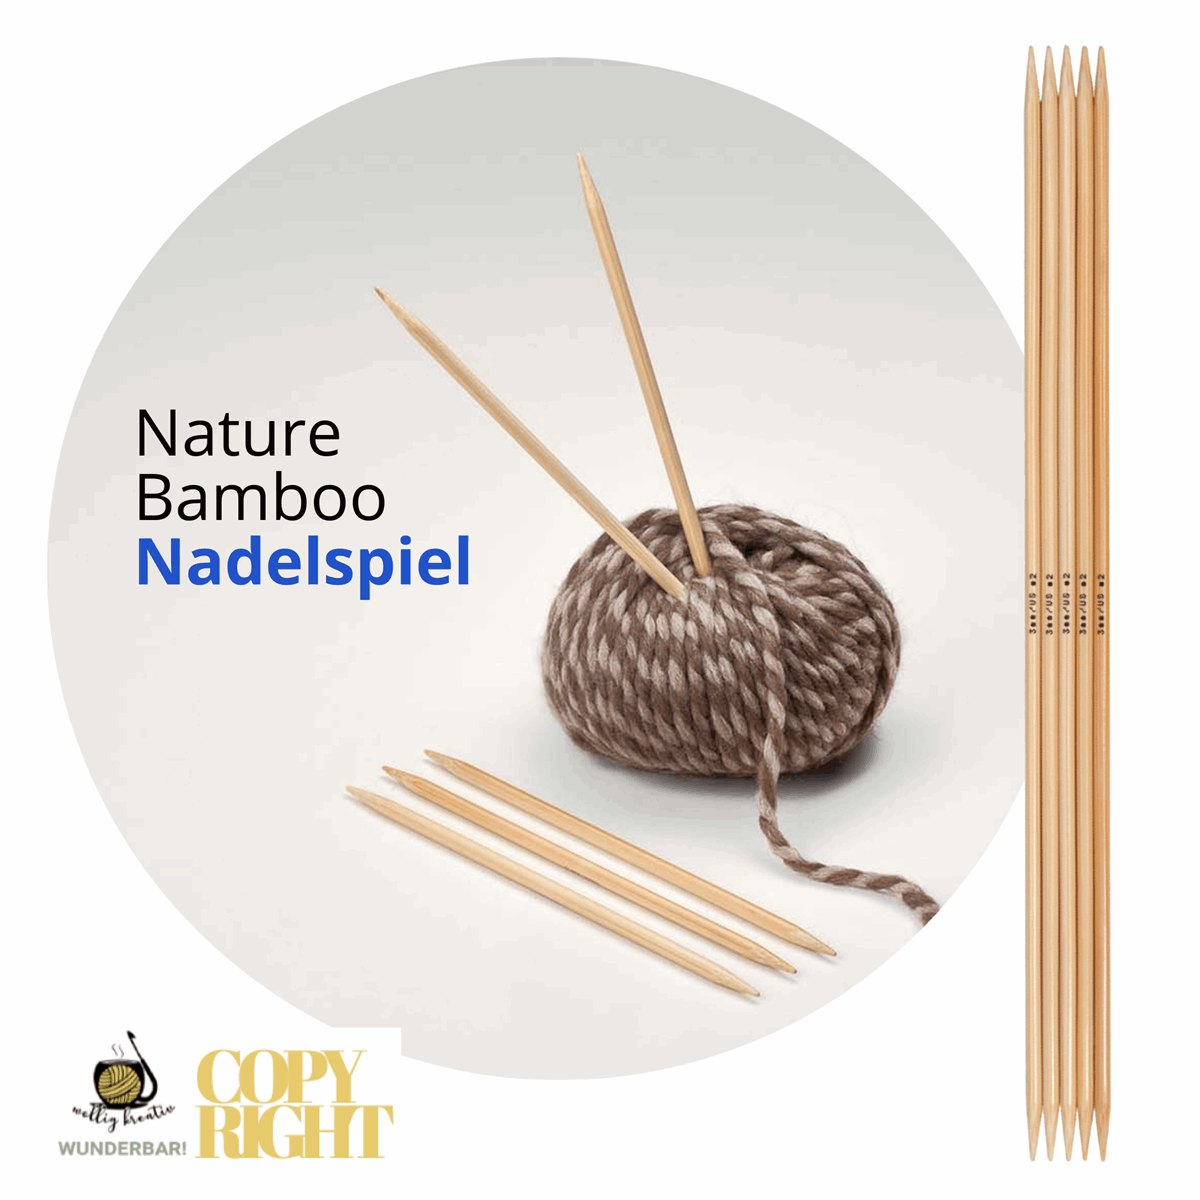 Addi, Nature Bamboo double pointed needles, 65012, size 8 length 20 cm